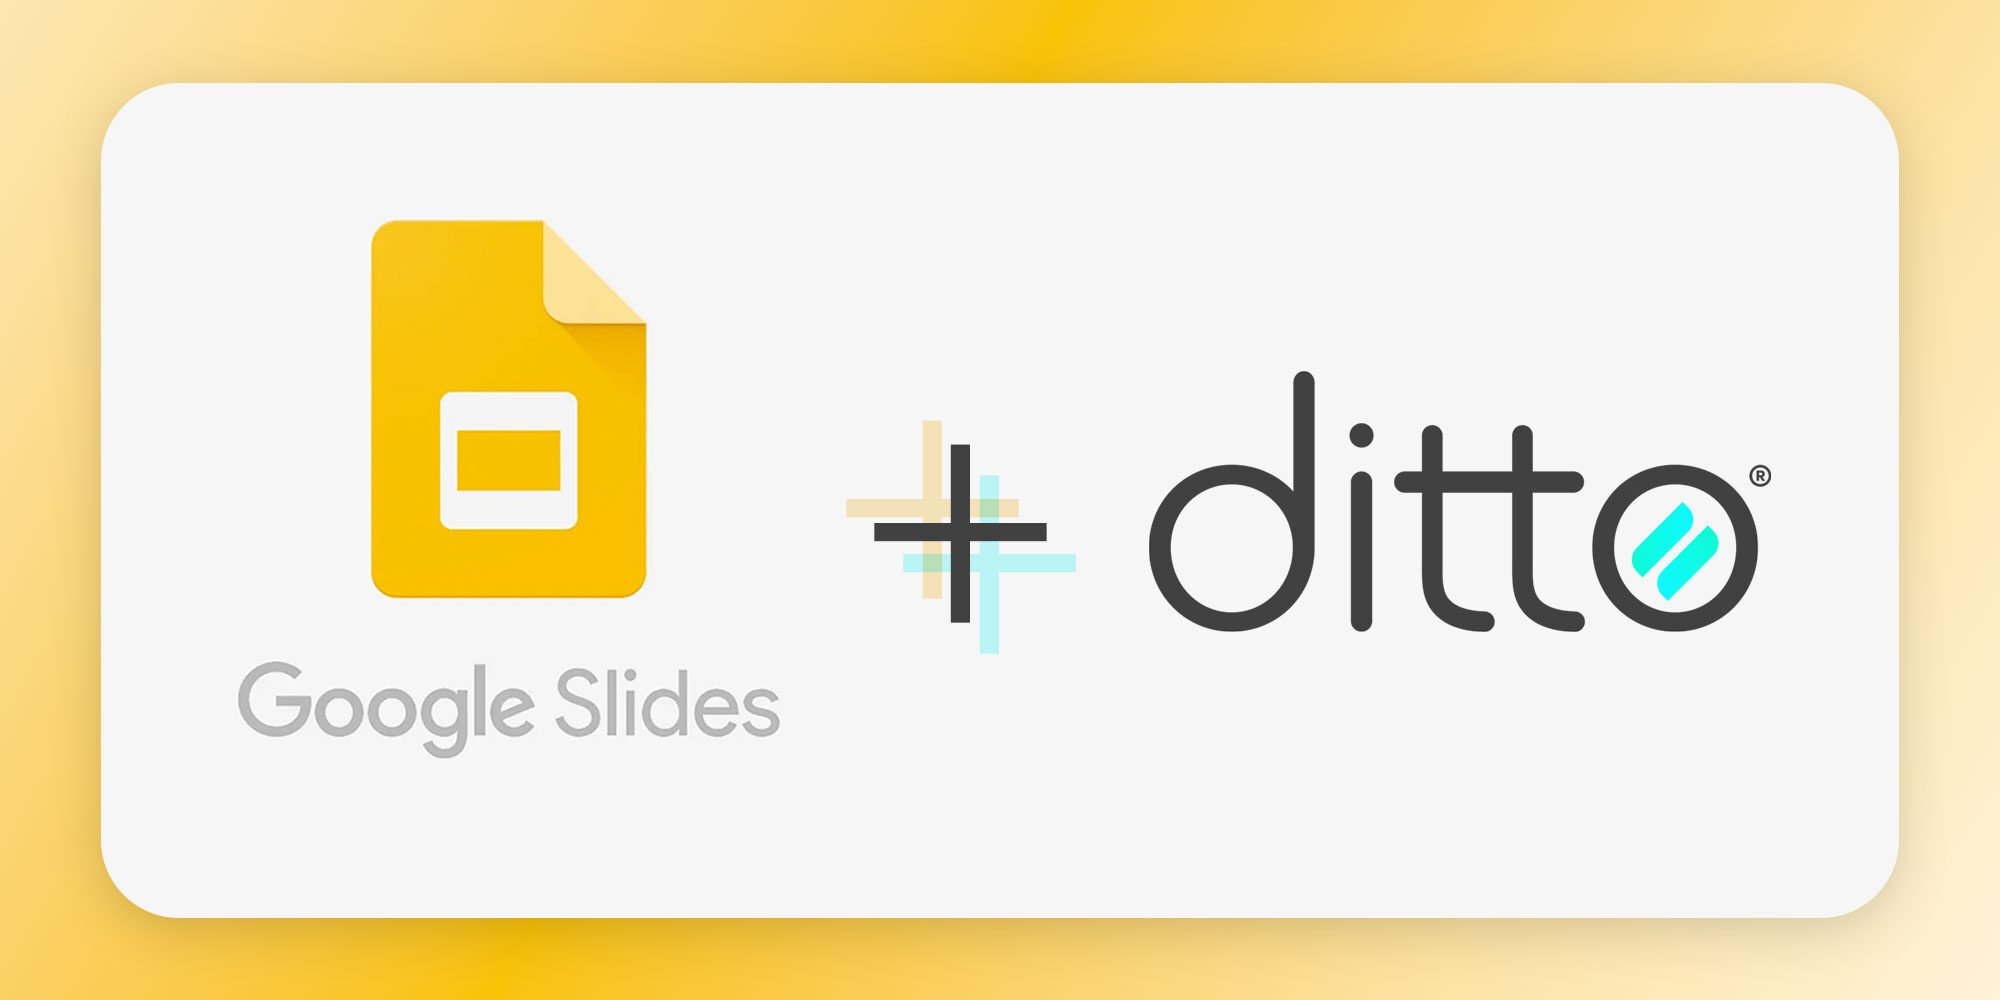 Ditto Launches Google Slides Integration for Digital Signage